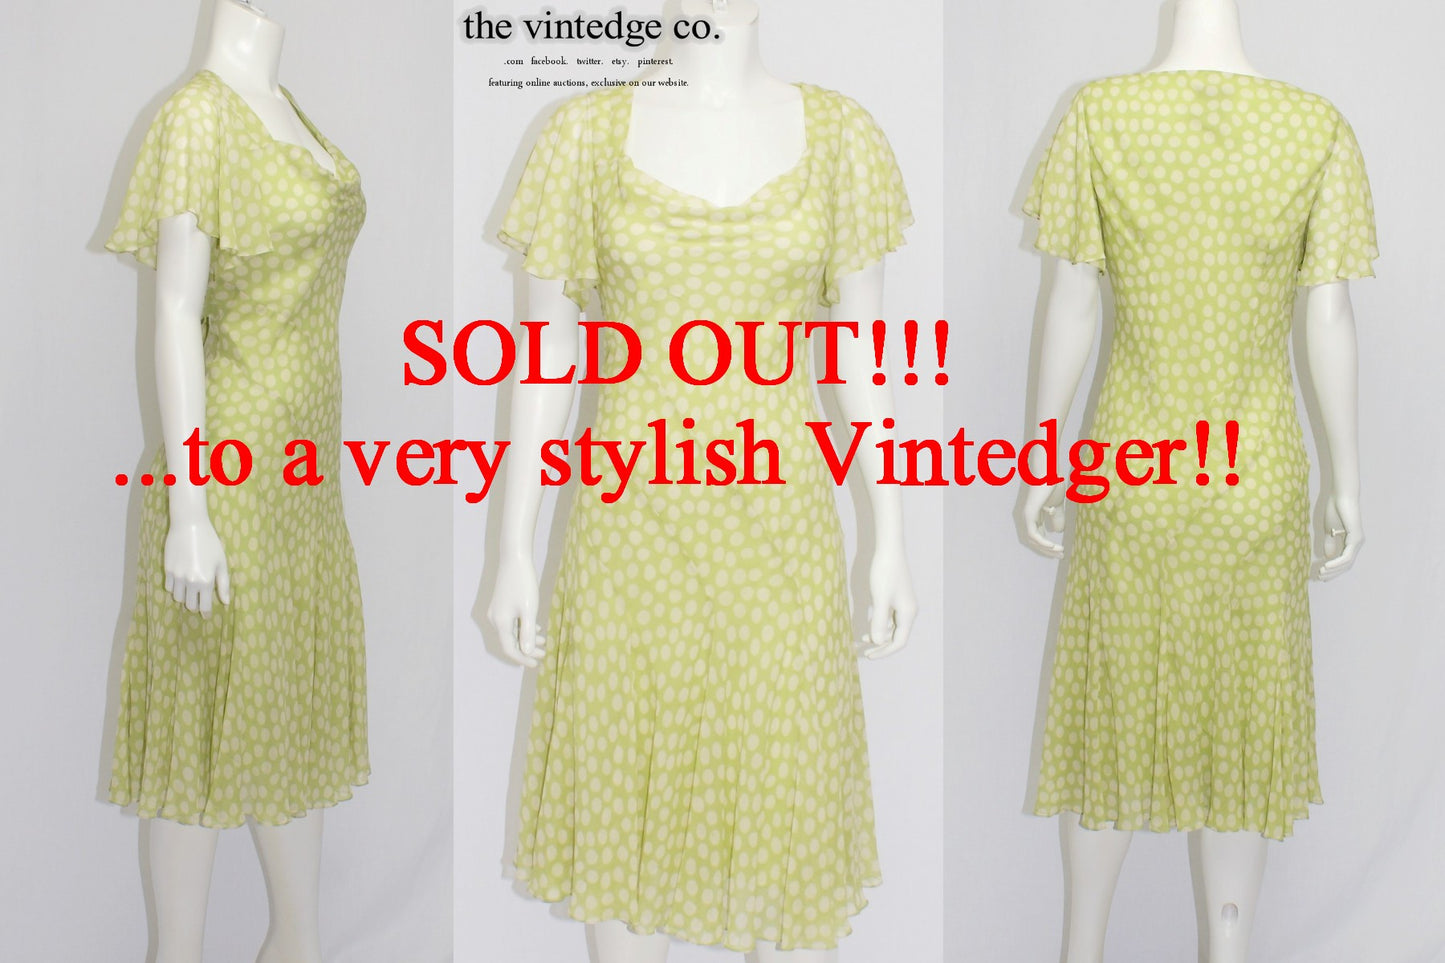 SOLD - Womens Dress The Vintedge Co.